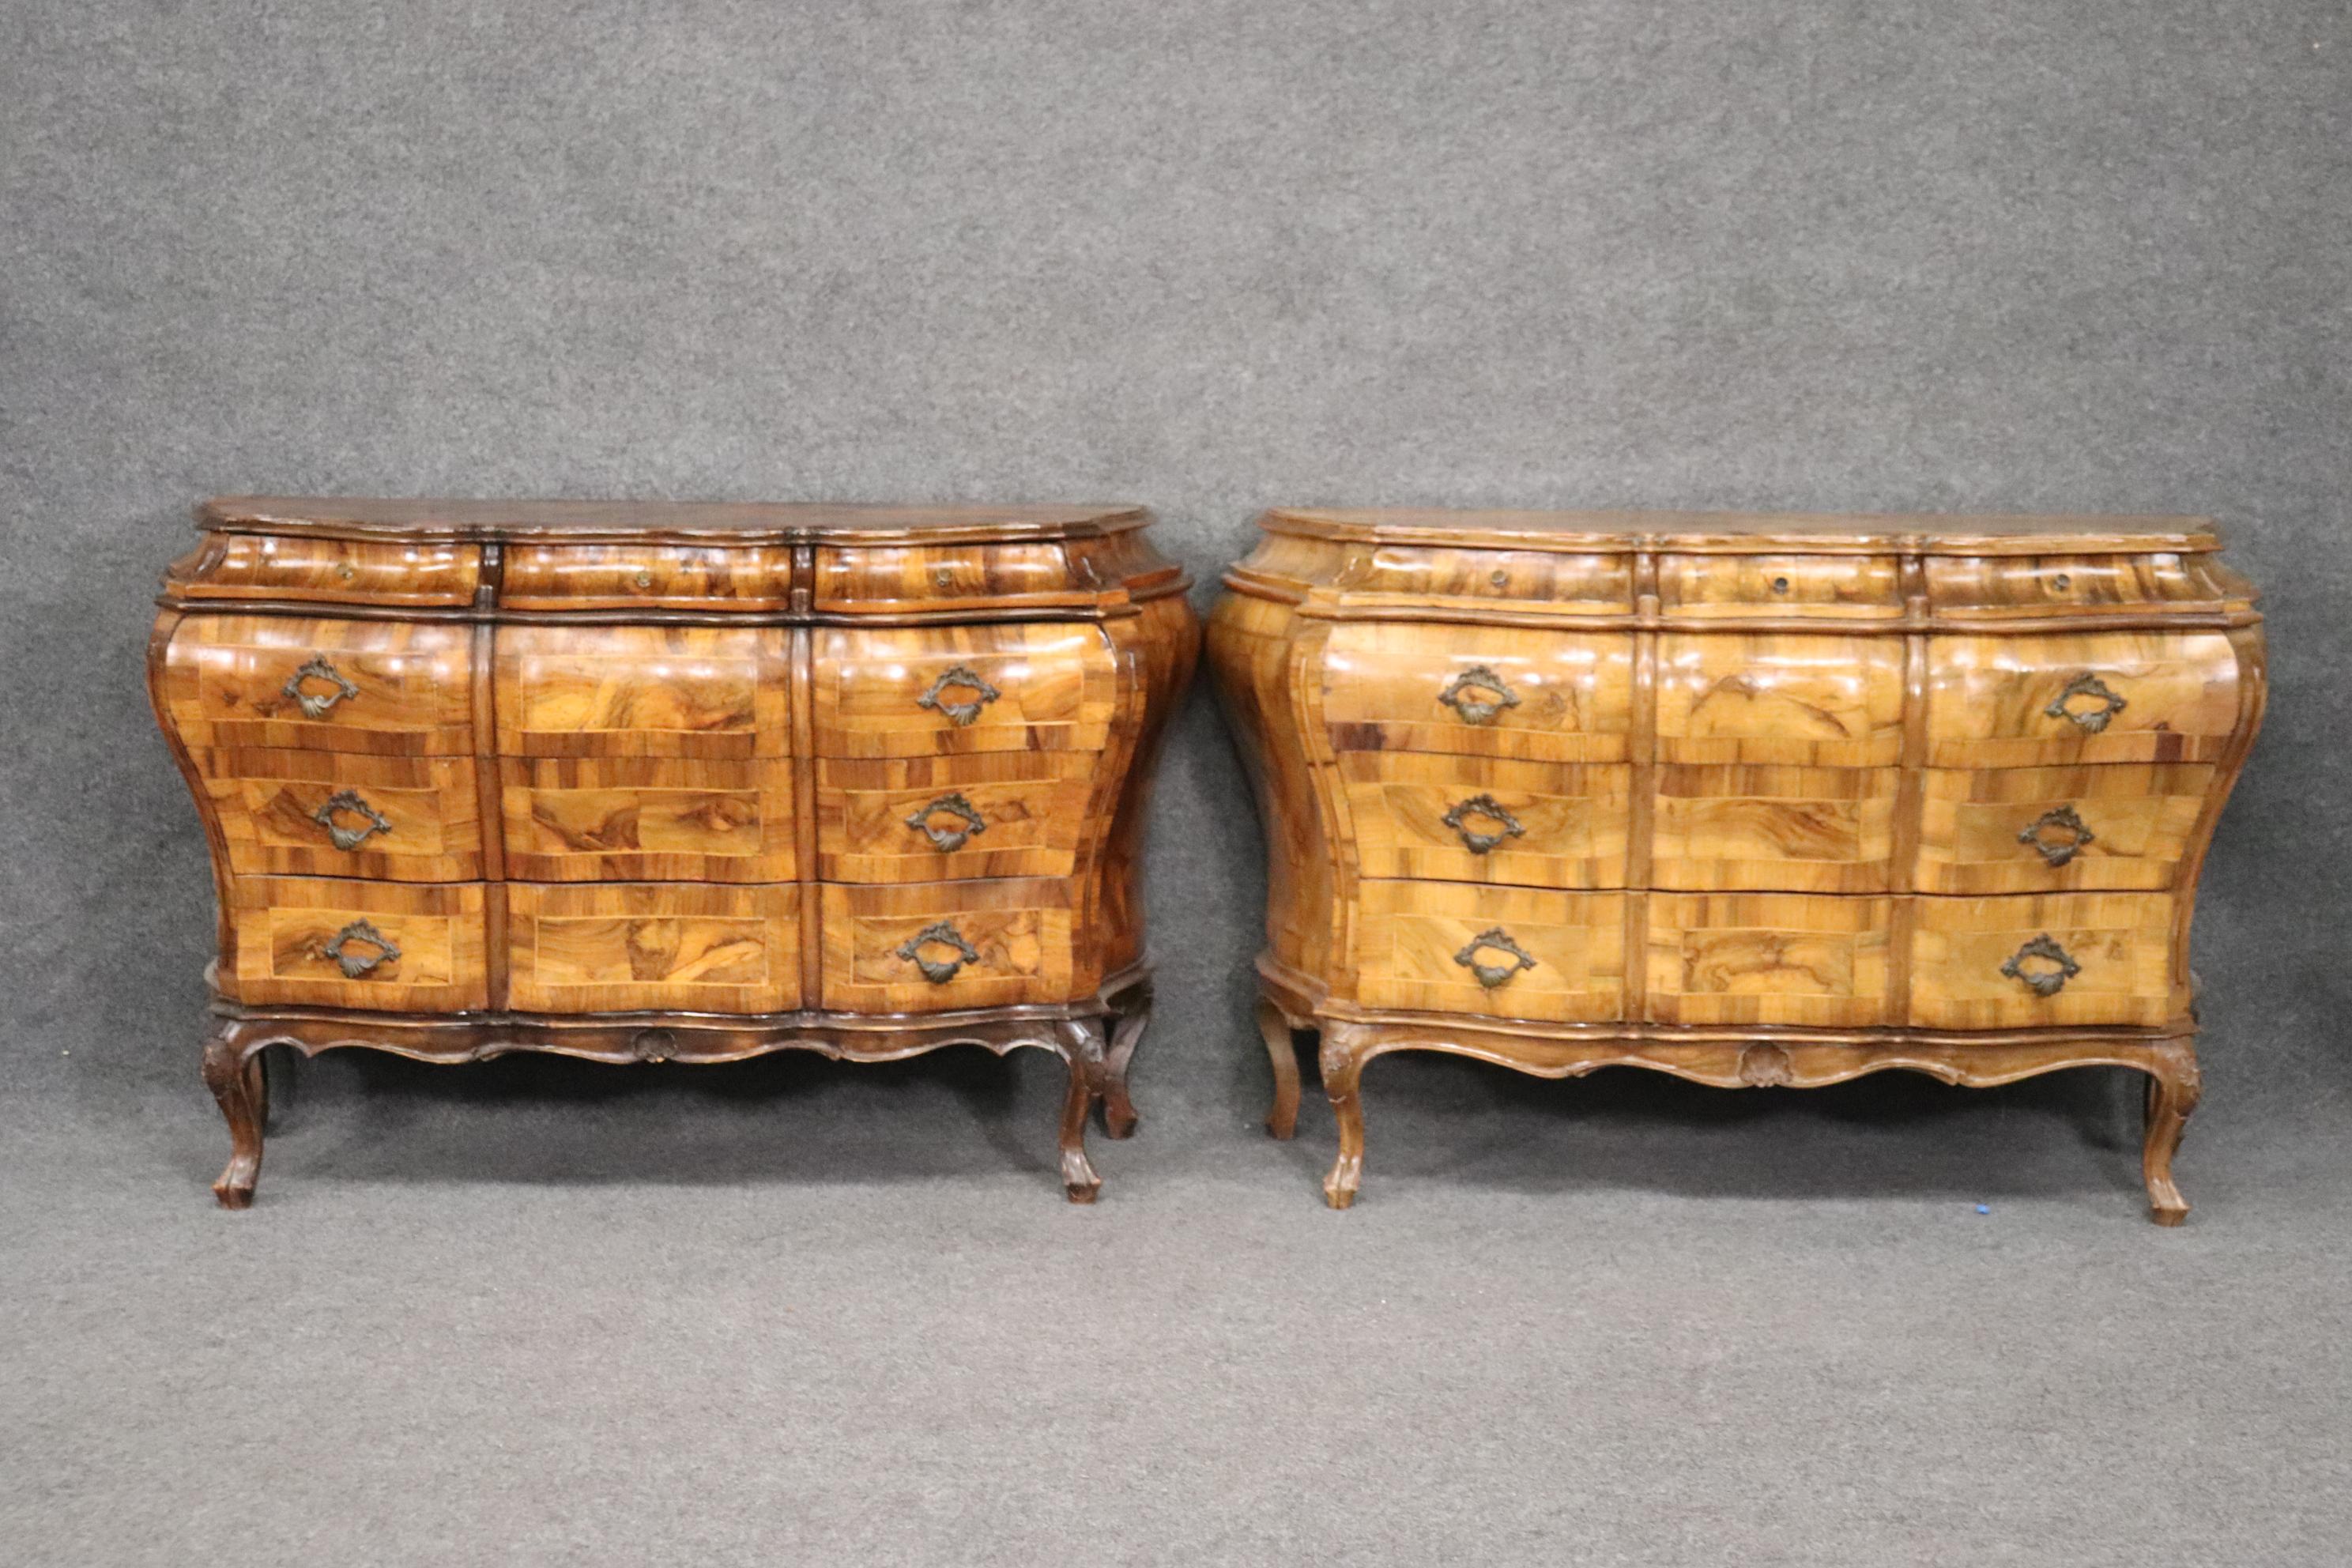 Rococo Revival Incredible Pair of Italian Provincial Olivewood Rococo Bombe Commodes